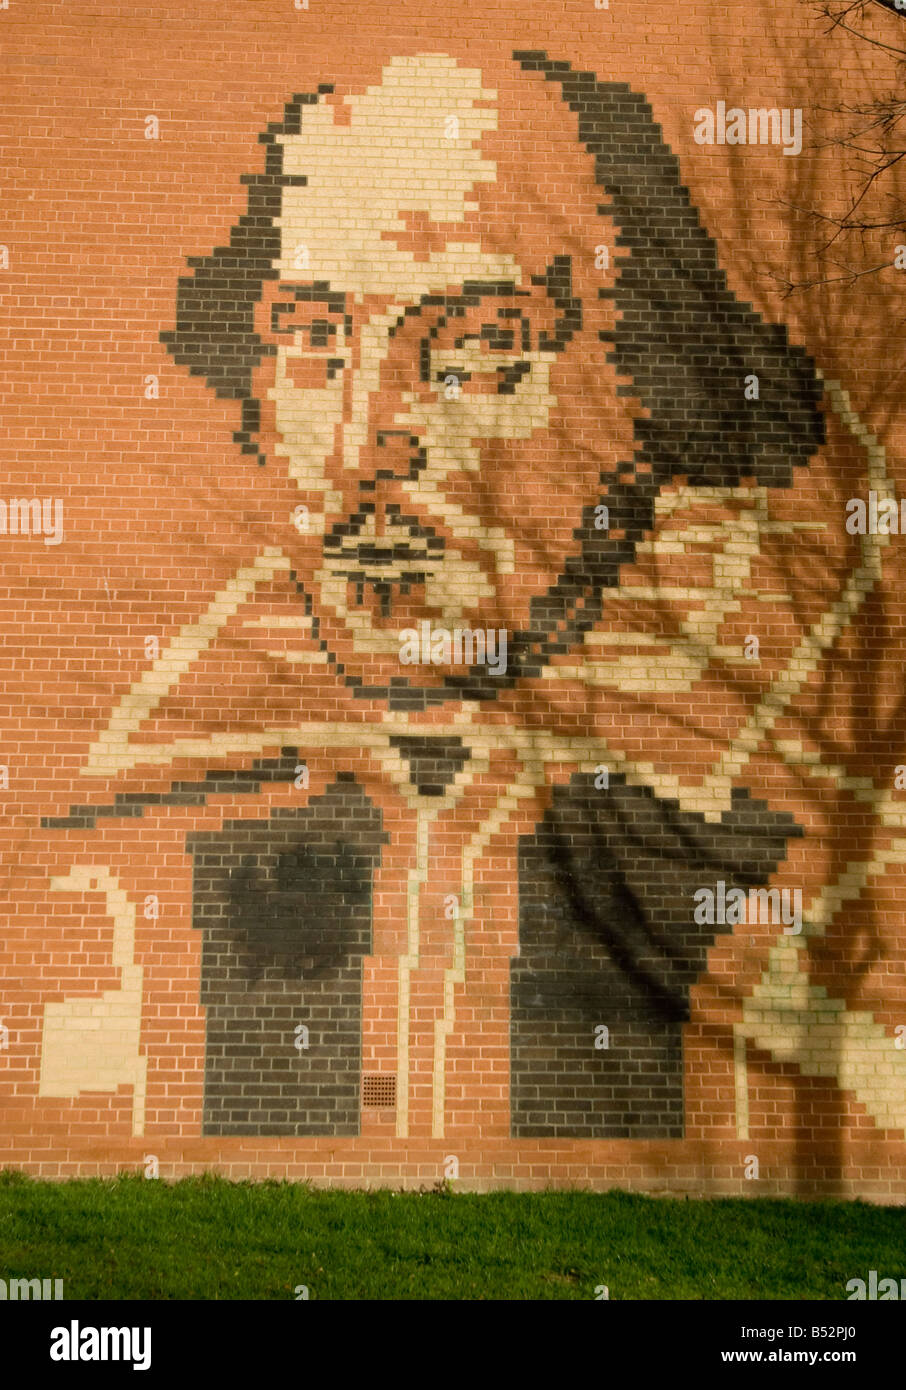 William Shakespeare in brick, South View West, Heaton, Newcastle upon Tyne Stock Photo